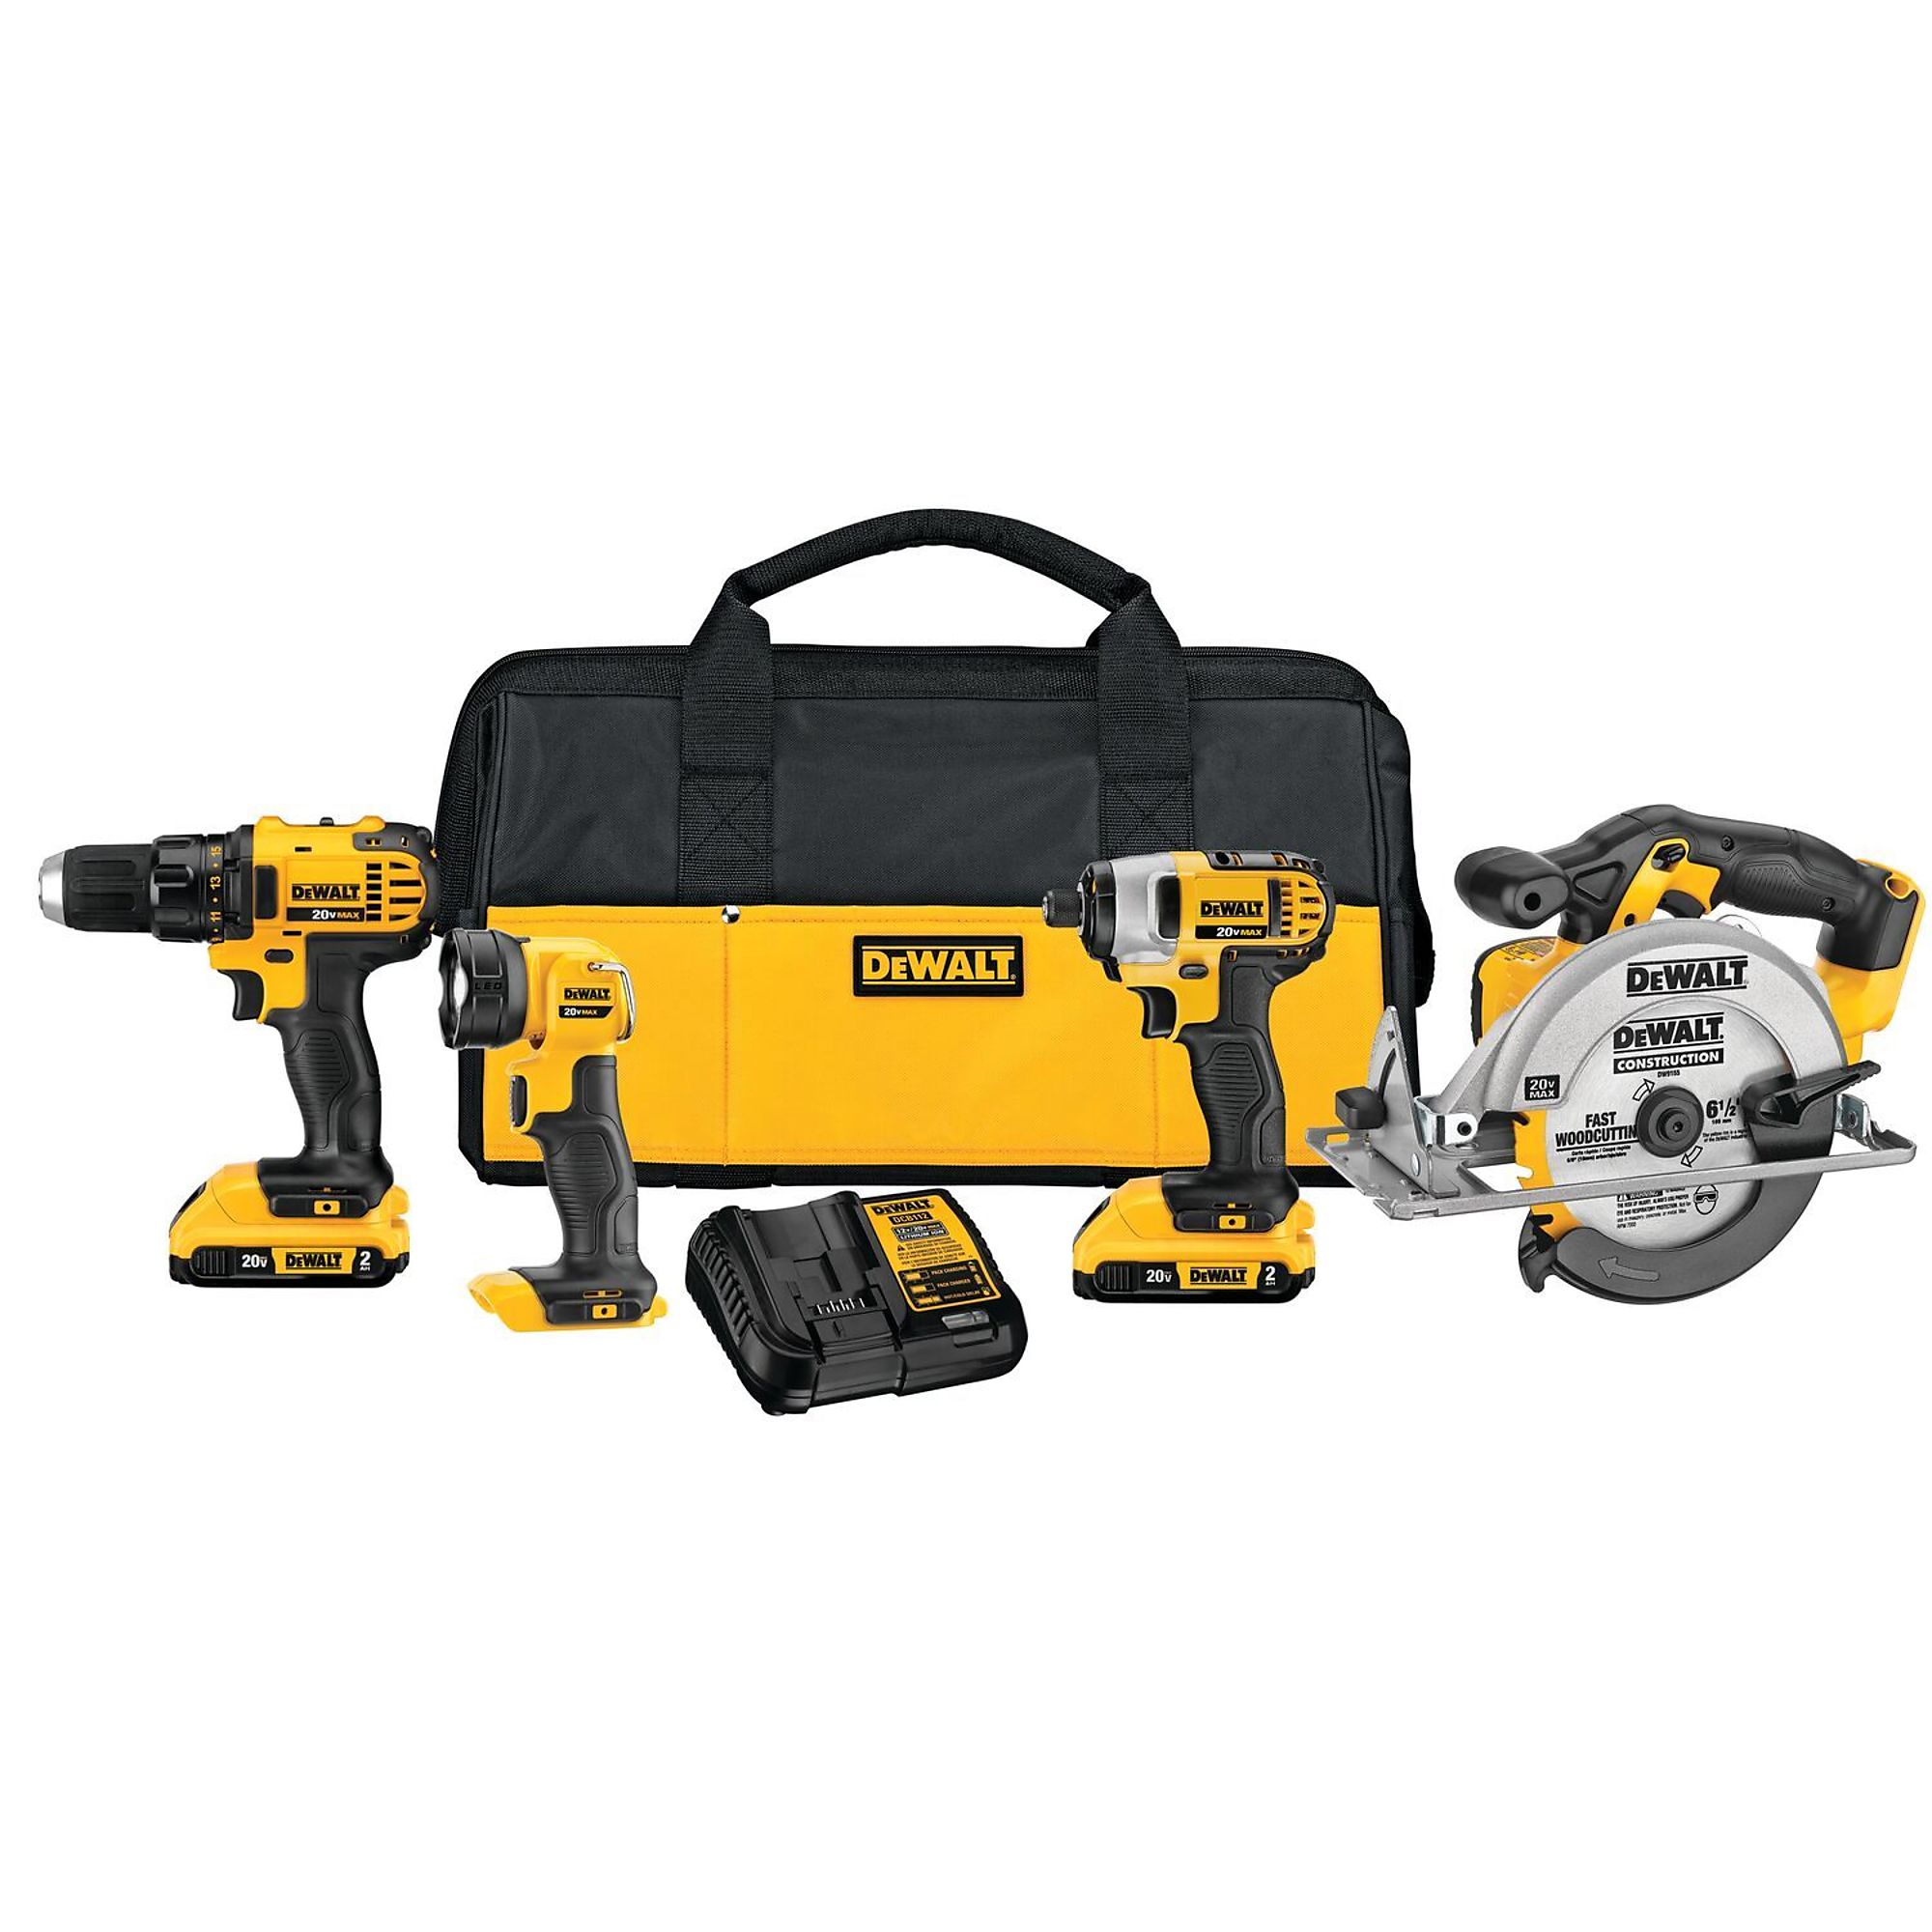 DEWALT, 20V MAX* Cordless 4-Tool Combo Kit, Chuck Size 1/2 in, Drive Size 1/4 in, Tools Included (qty.) 4 Model DCK421D2